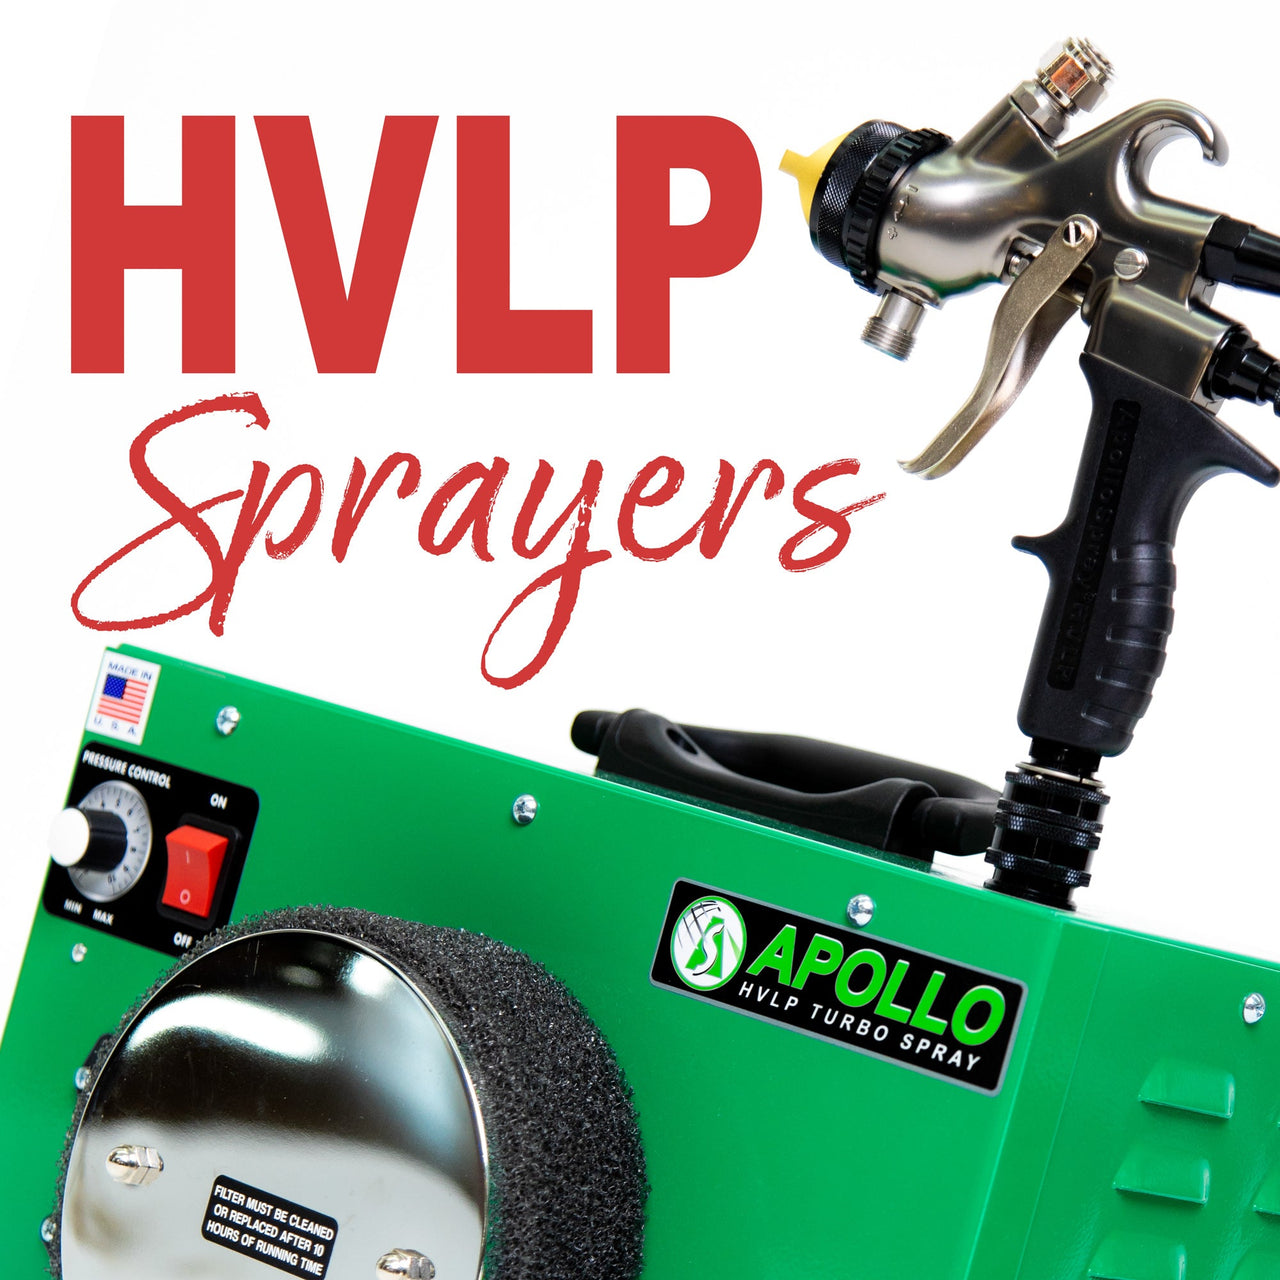 HVLP Sprayers at Paint Life Supply Co.